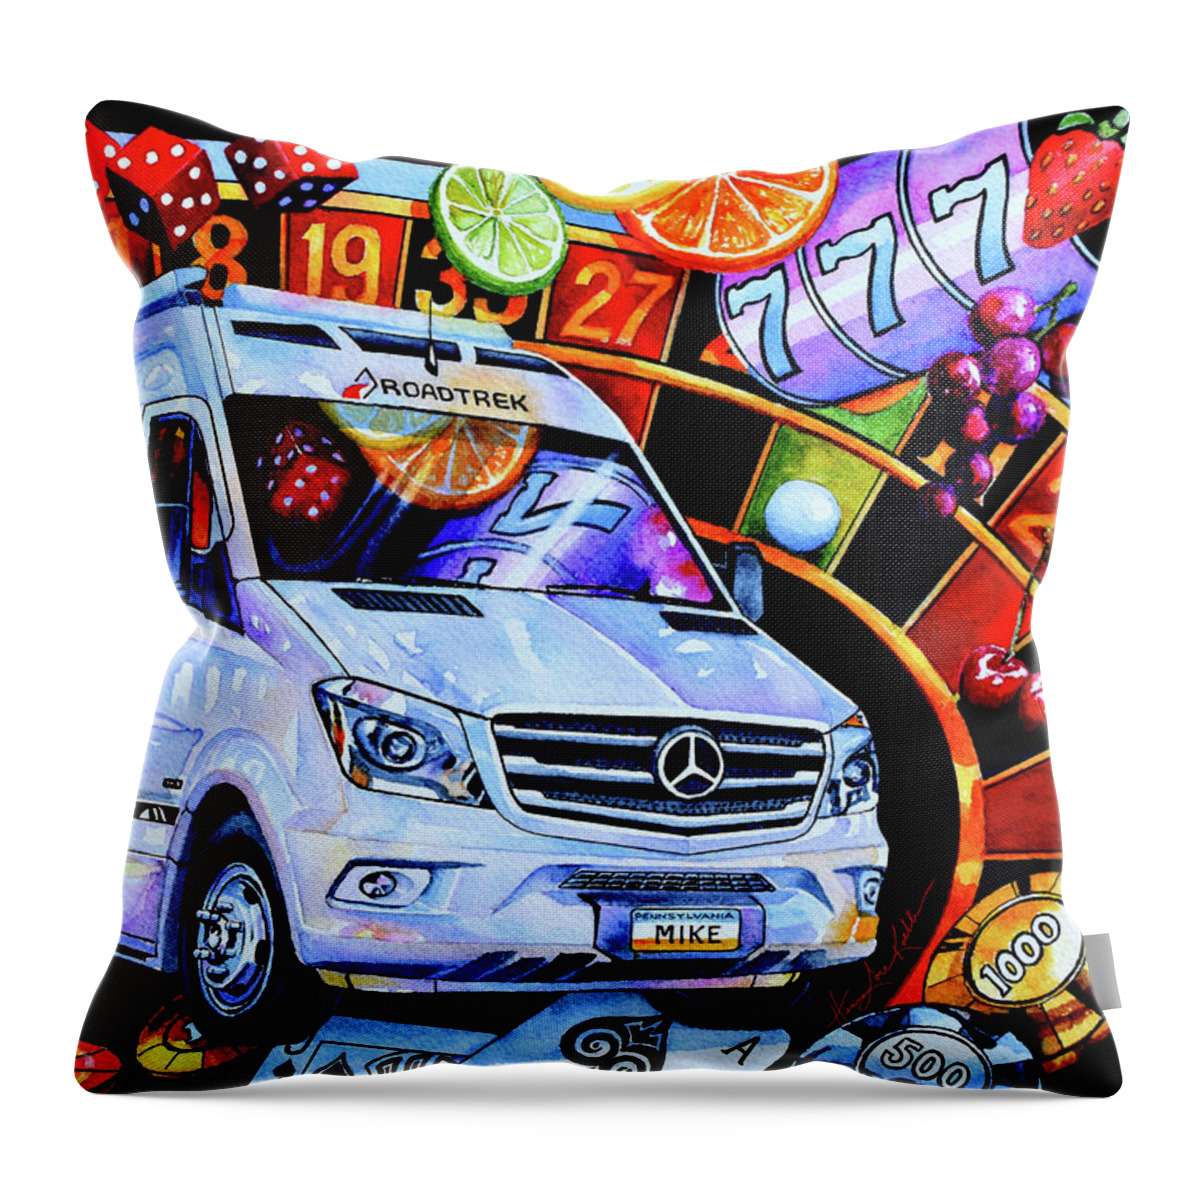 Casino Vacation Throw Pillow featuring the painting Casino Vacation by Hanne Lore Koehler